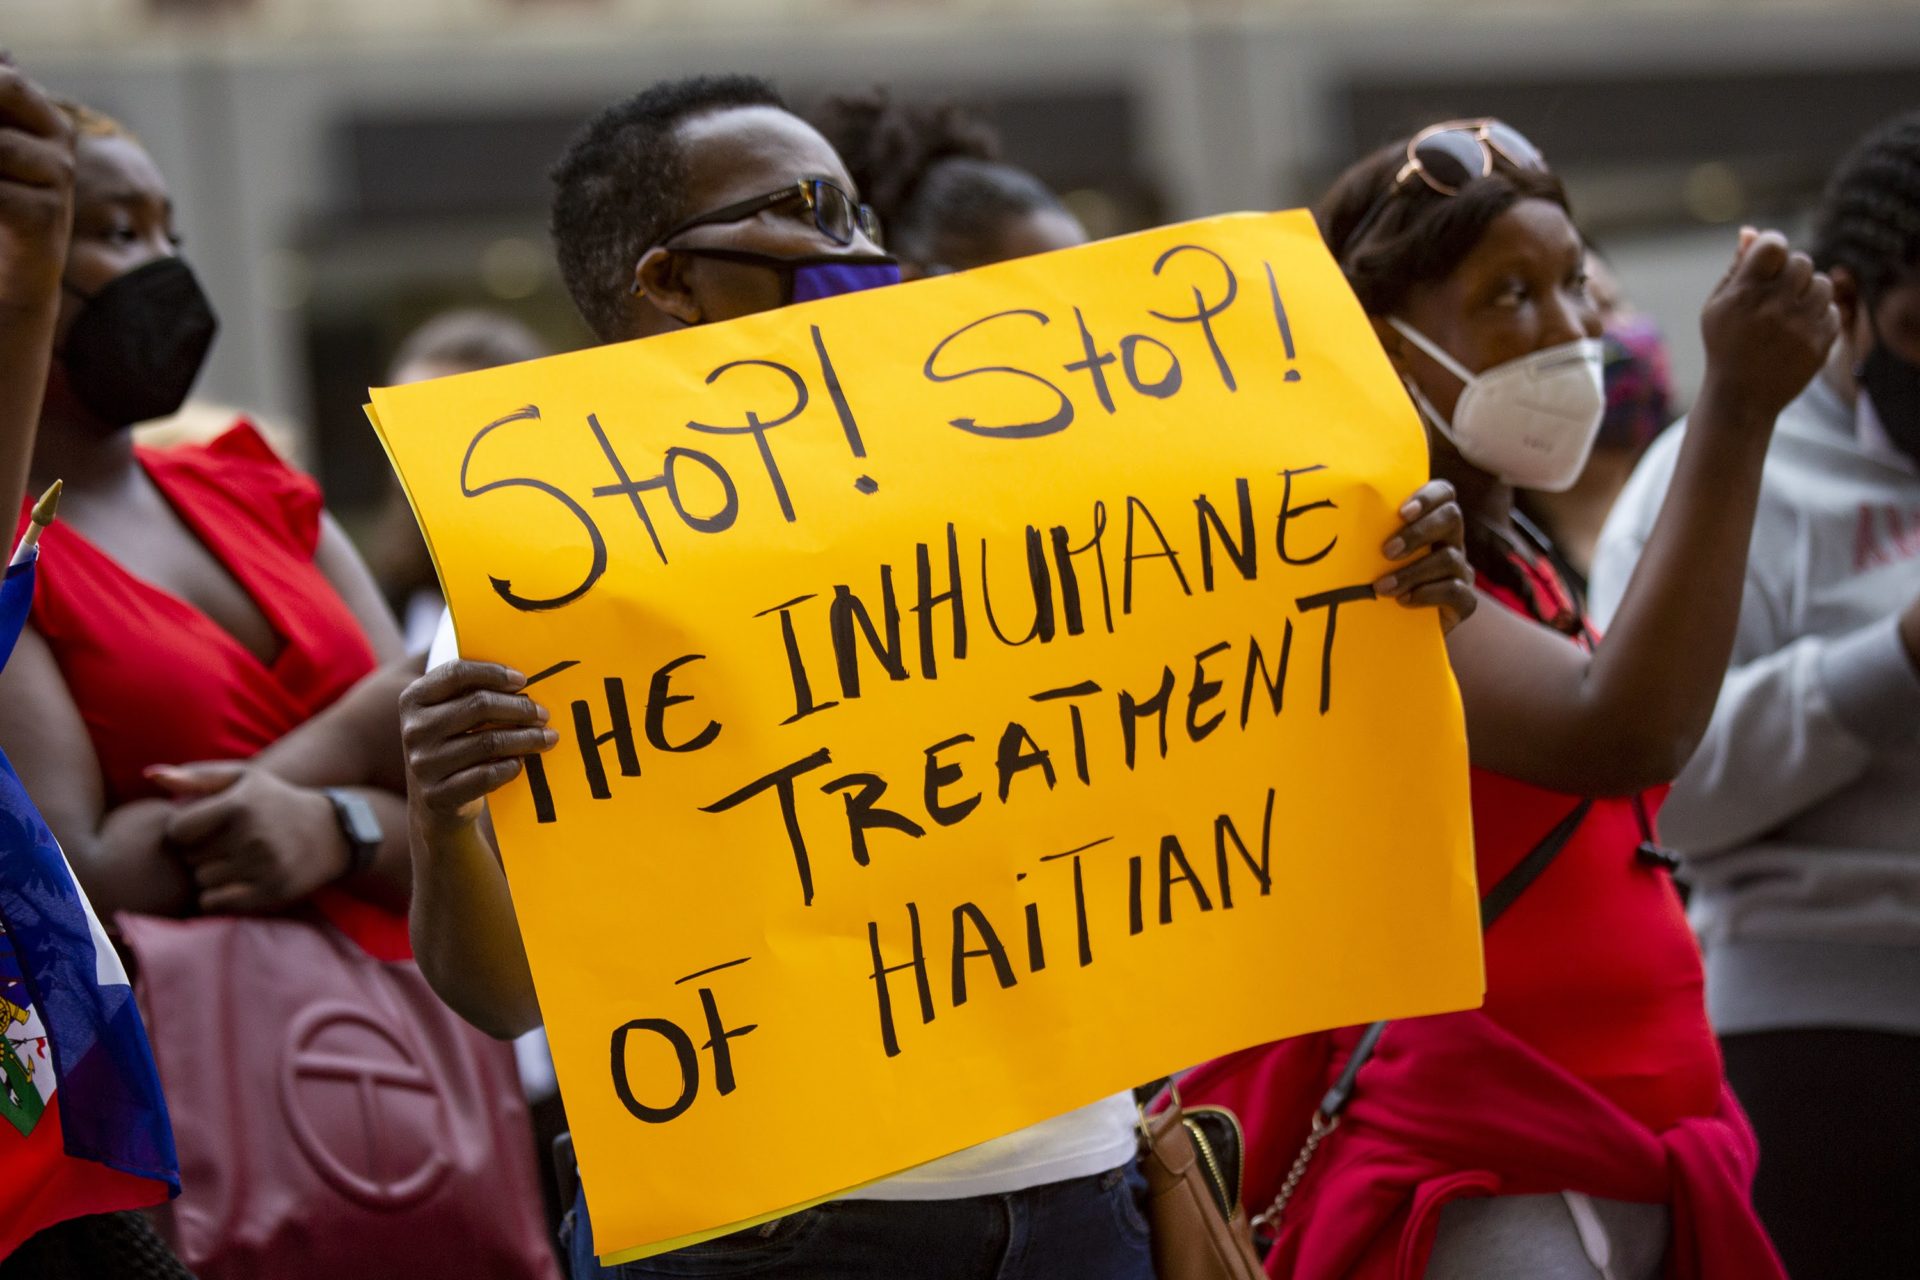 We call on the U.S. government to immediately halt expulsions of Haitians.